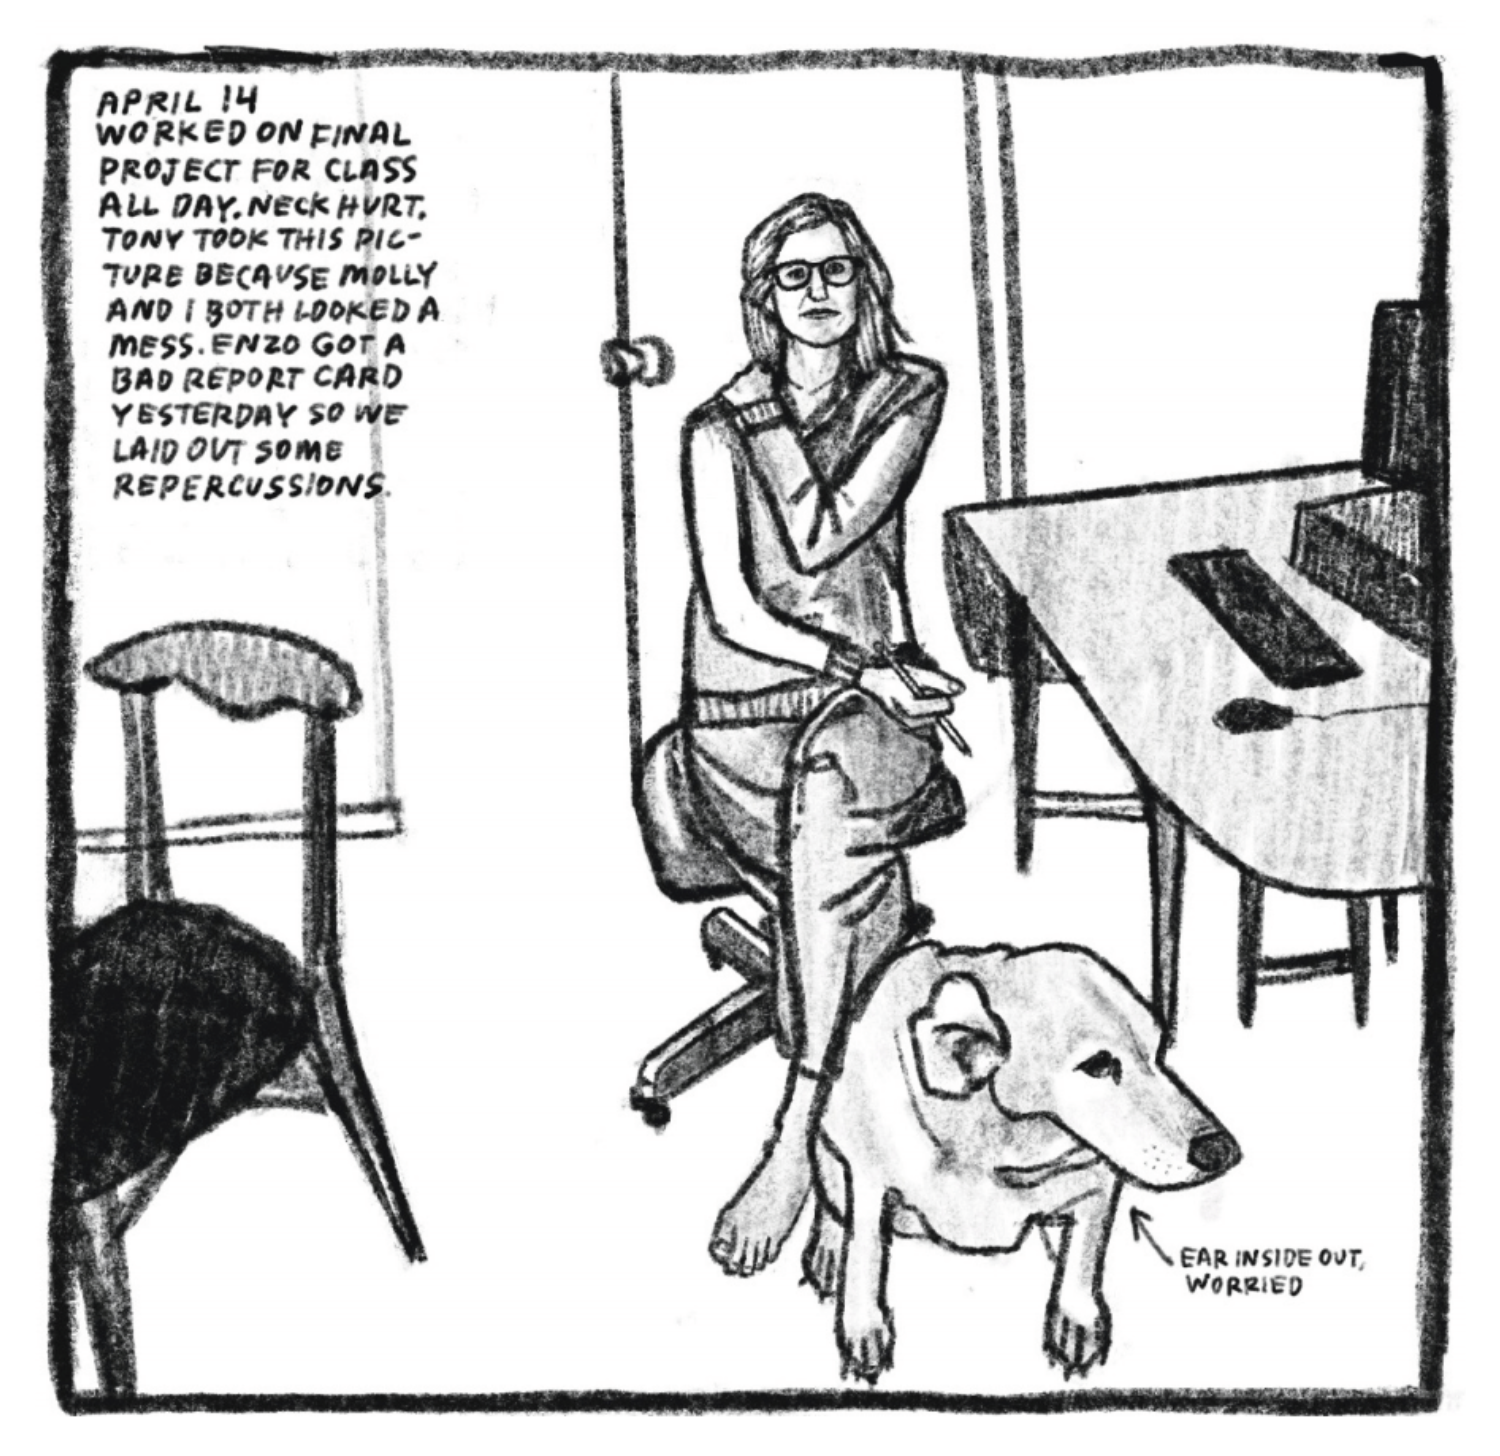 Kim sits at a desk but is turned to face the viewer. A PC, keyboard and mouse are on the desk, and there is a chair a couple feet away. She is wearing glasses and comfortable clothes. Her legs are crossed. She holds a pencil in one hand, and grabs her shoulder with the other. Her dog sits at her feet; his ear is turned inside out. She points out that he's worried. 

"April 14. Worked on final project for class all day. Neck hurt. Tony took this picture because Molly and I both looked a mess. Enzo got a bad report card yesterday so we laid out some repercussions."